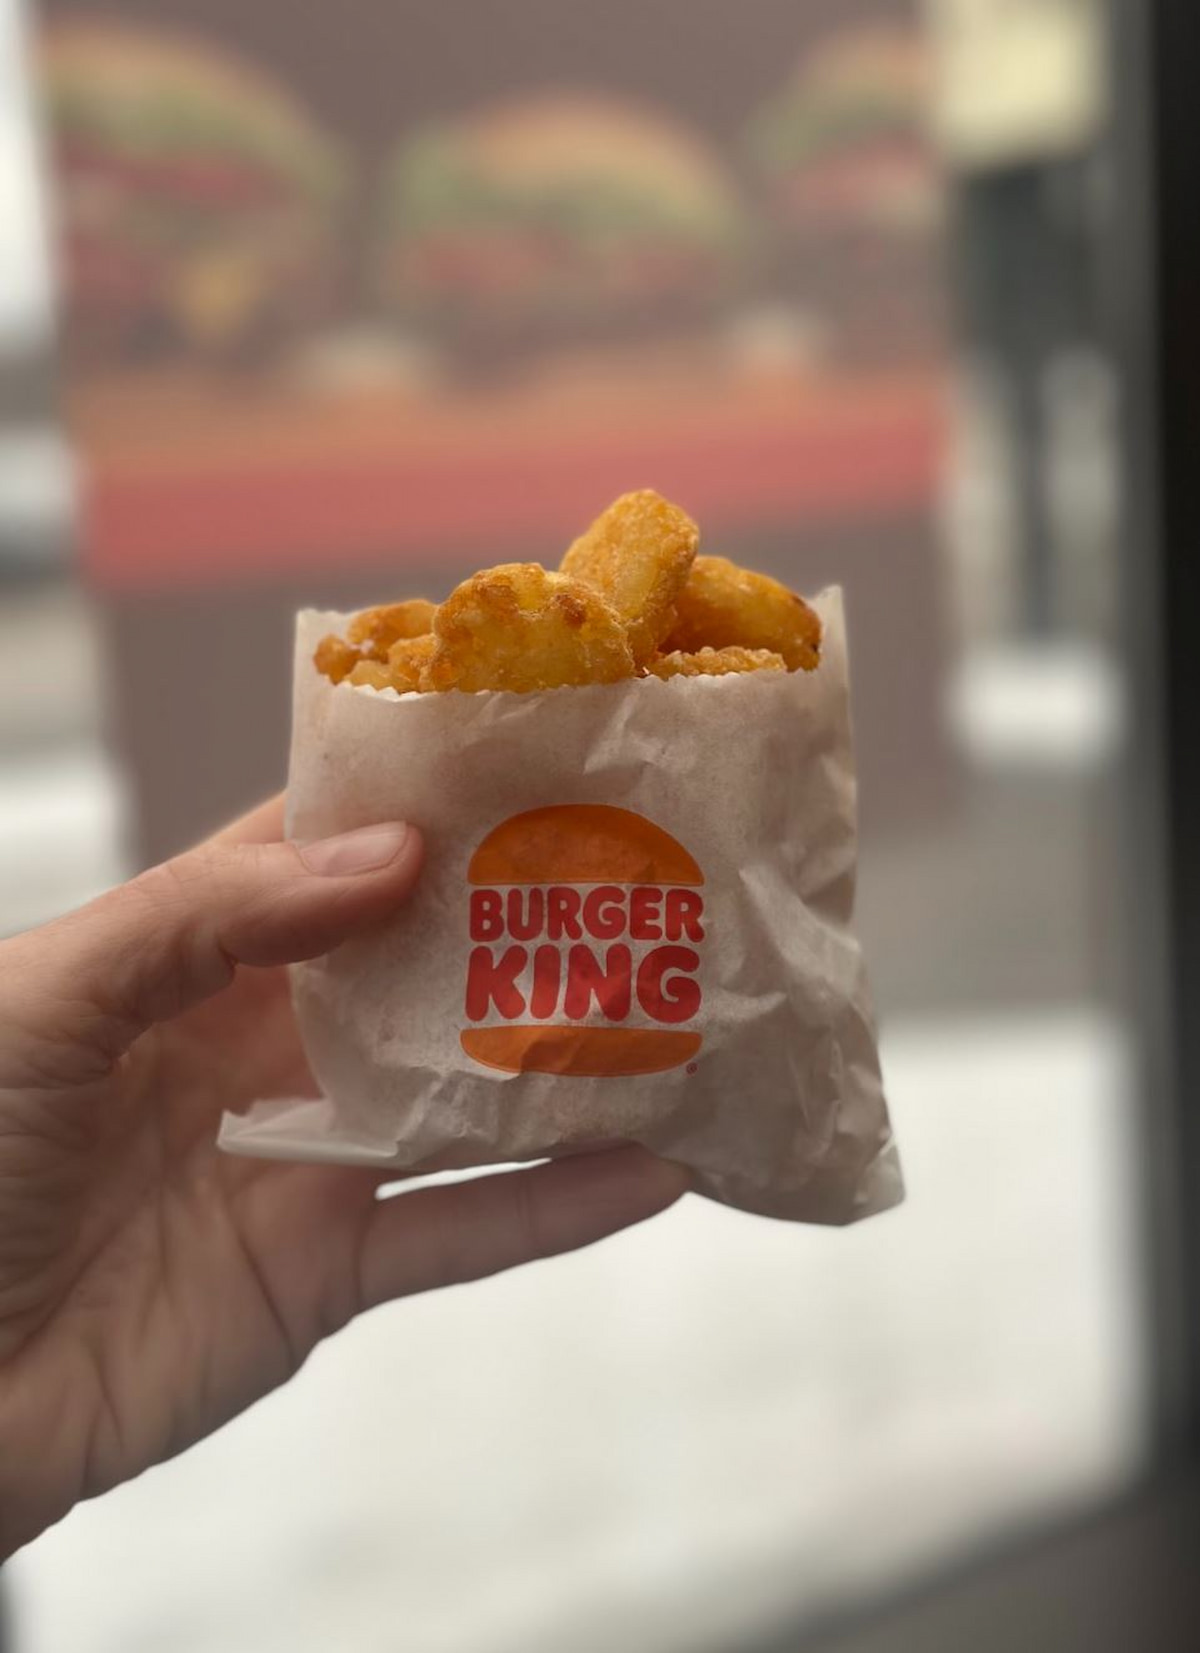 A package of vegan hash browns from Burger King.